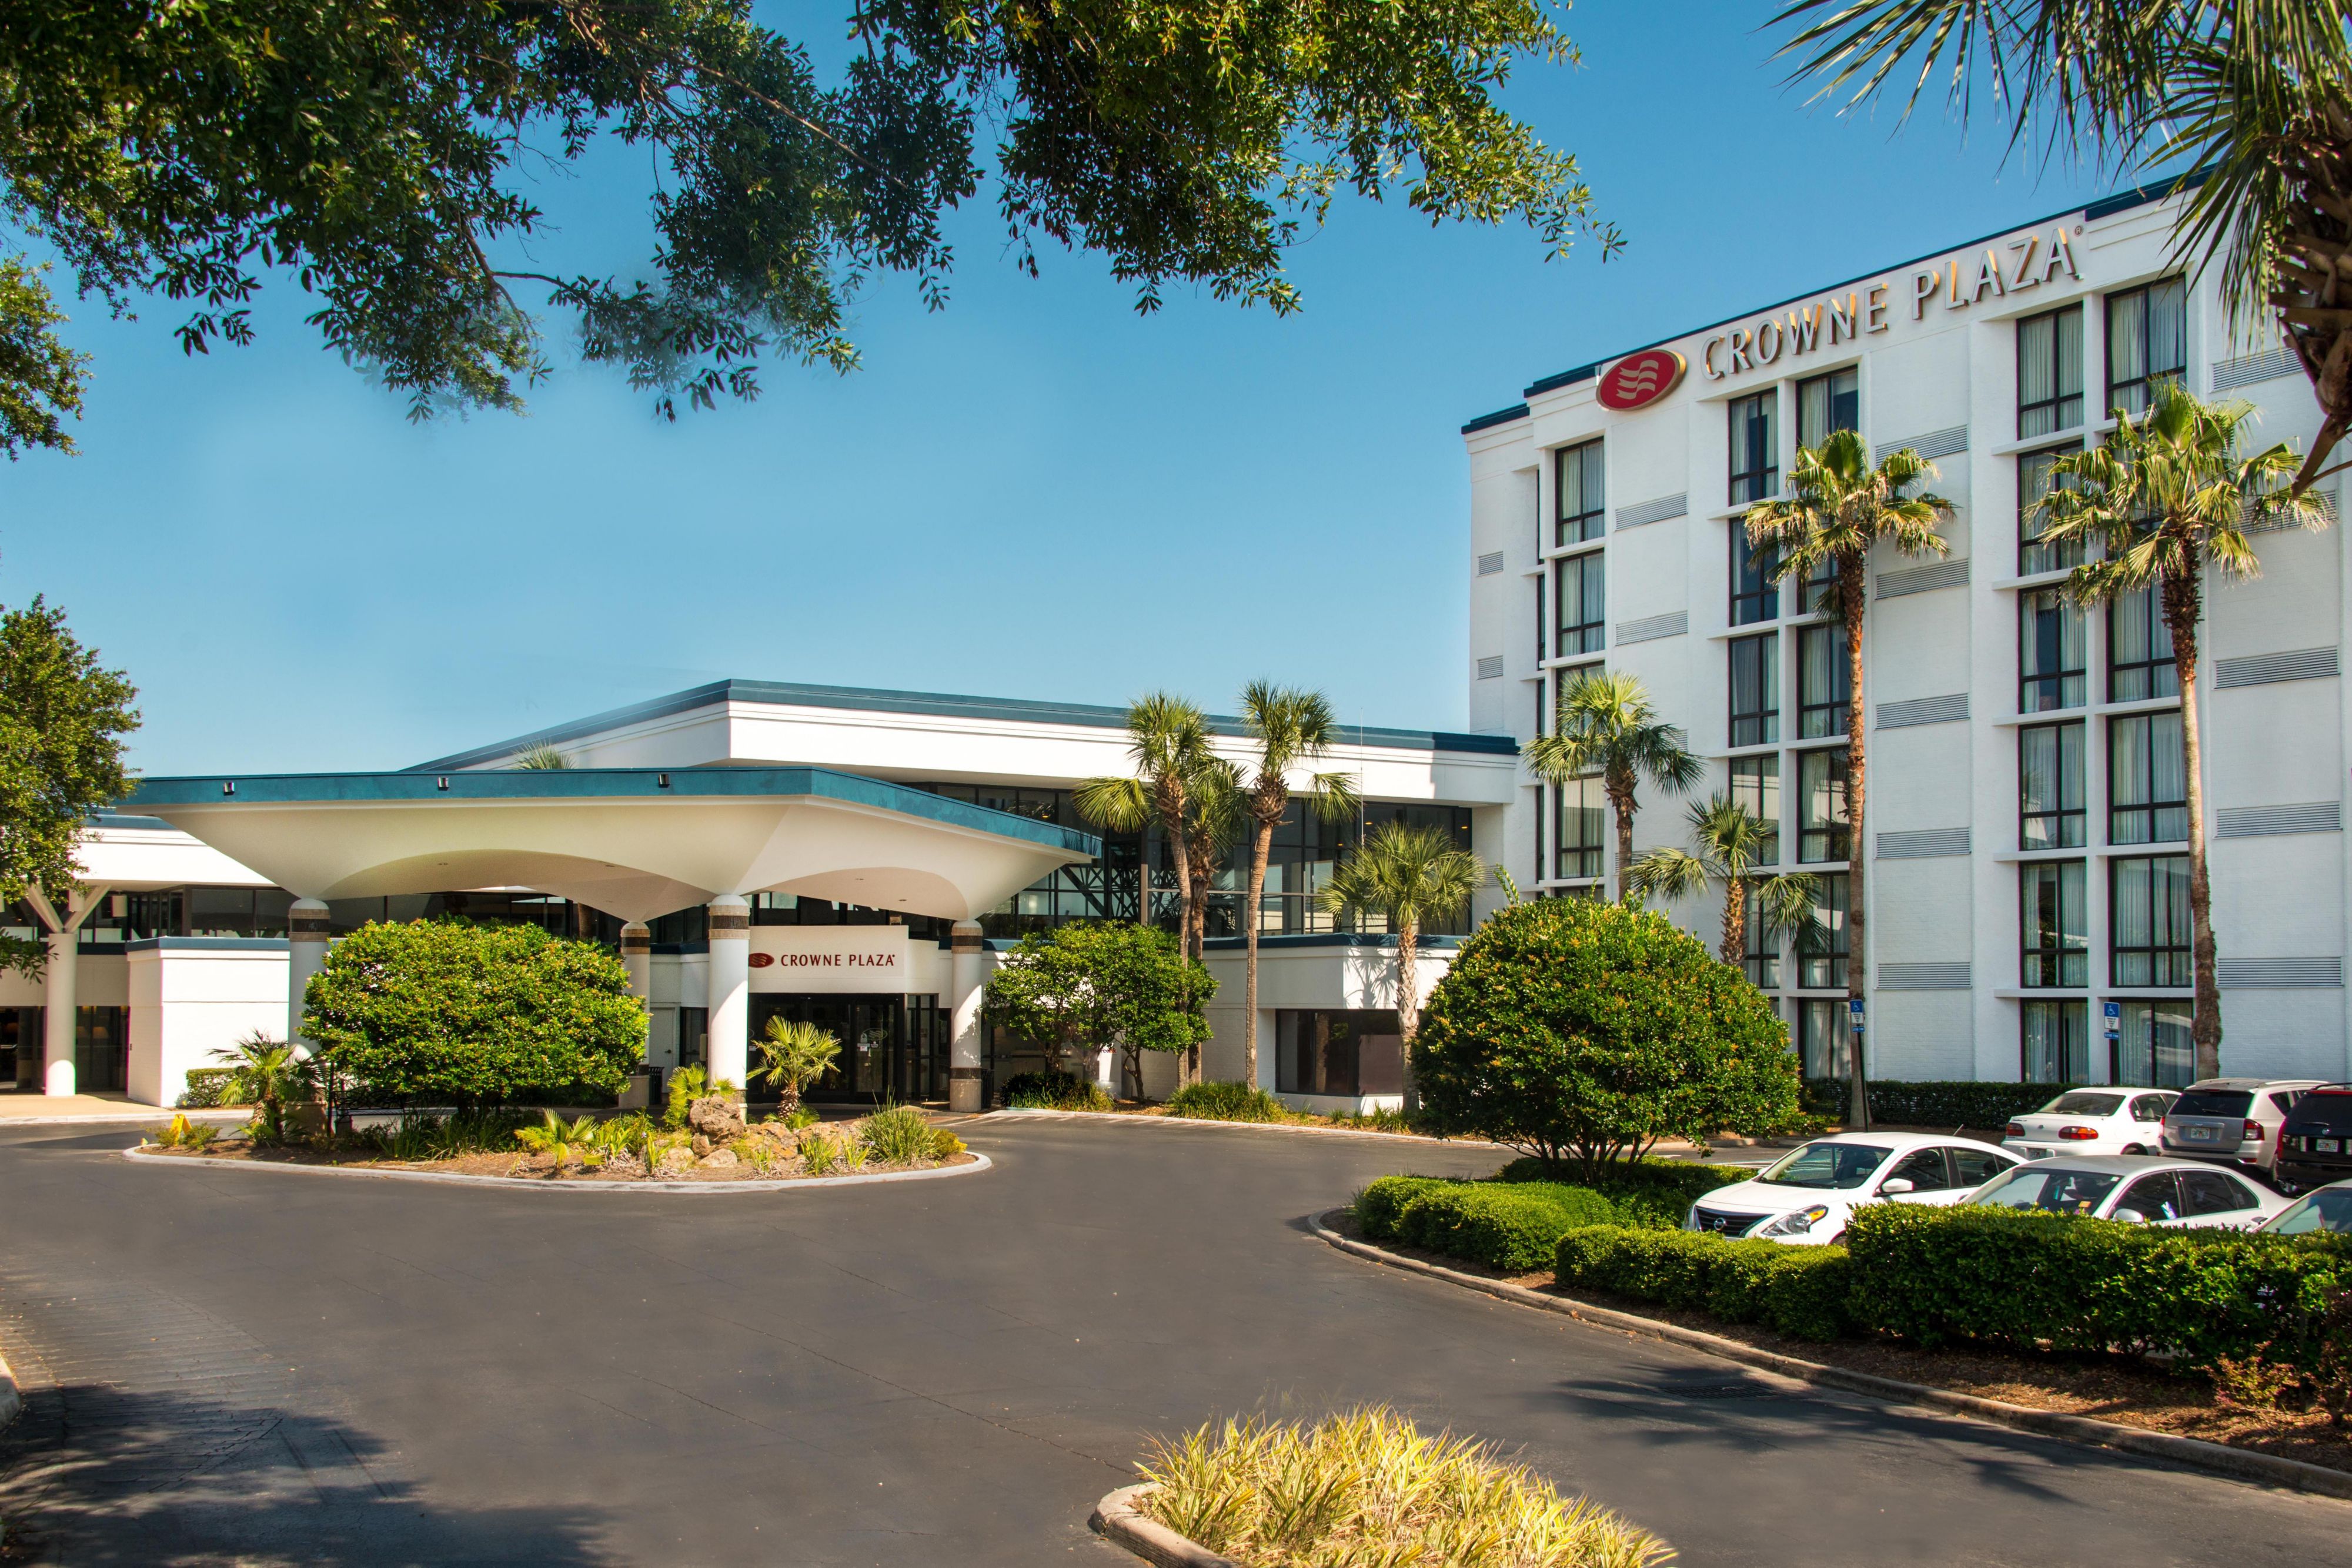 Stay at Crowne Plaza Jacksonville hotel located near the airport.